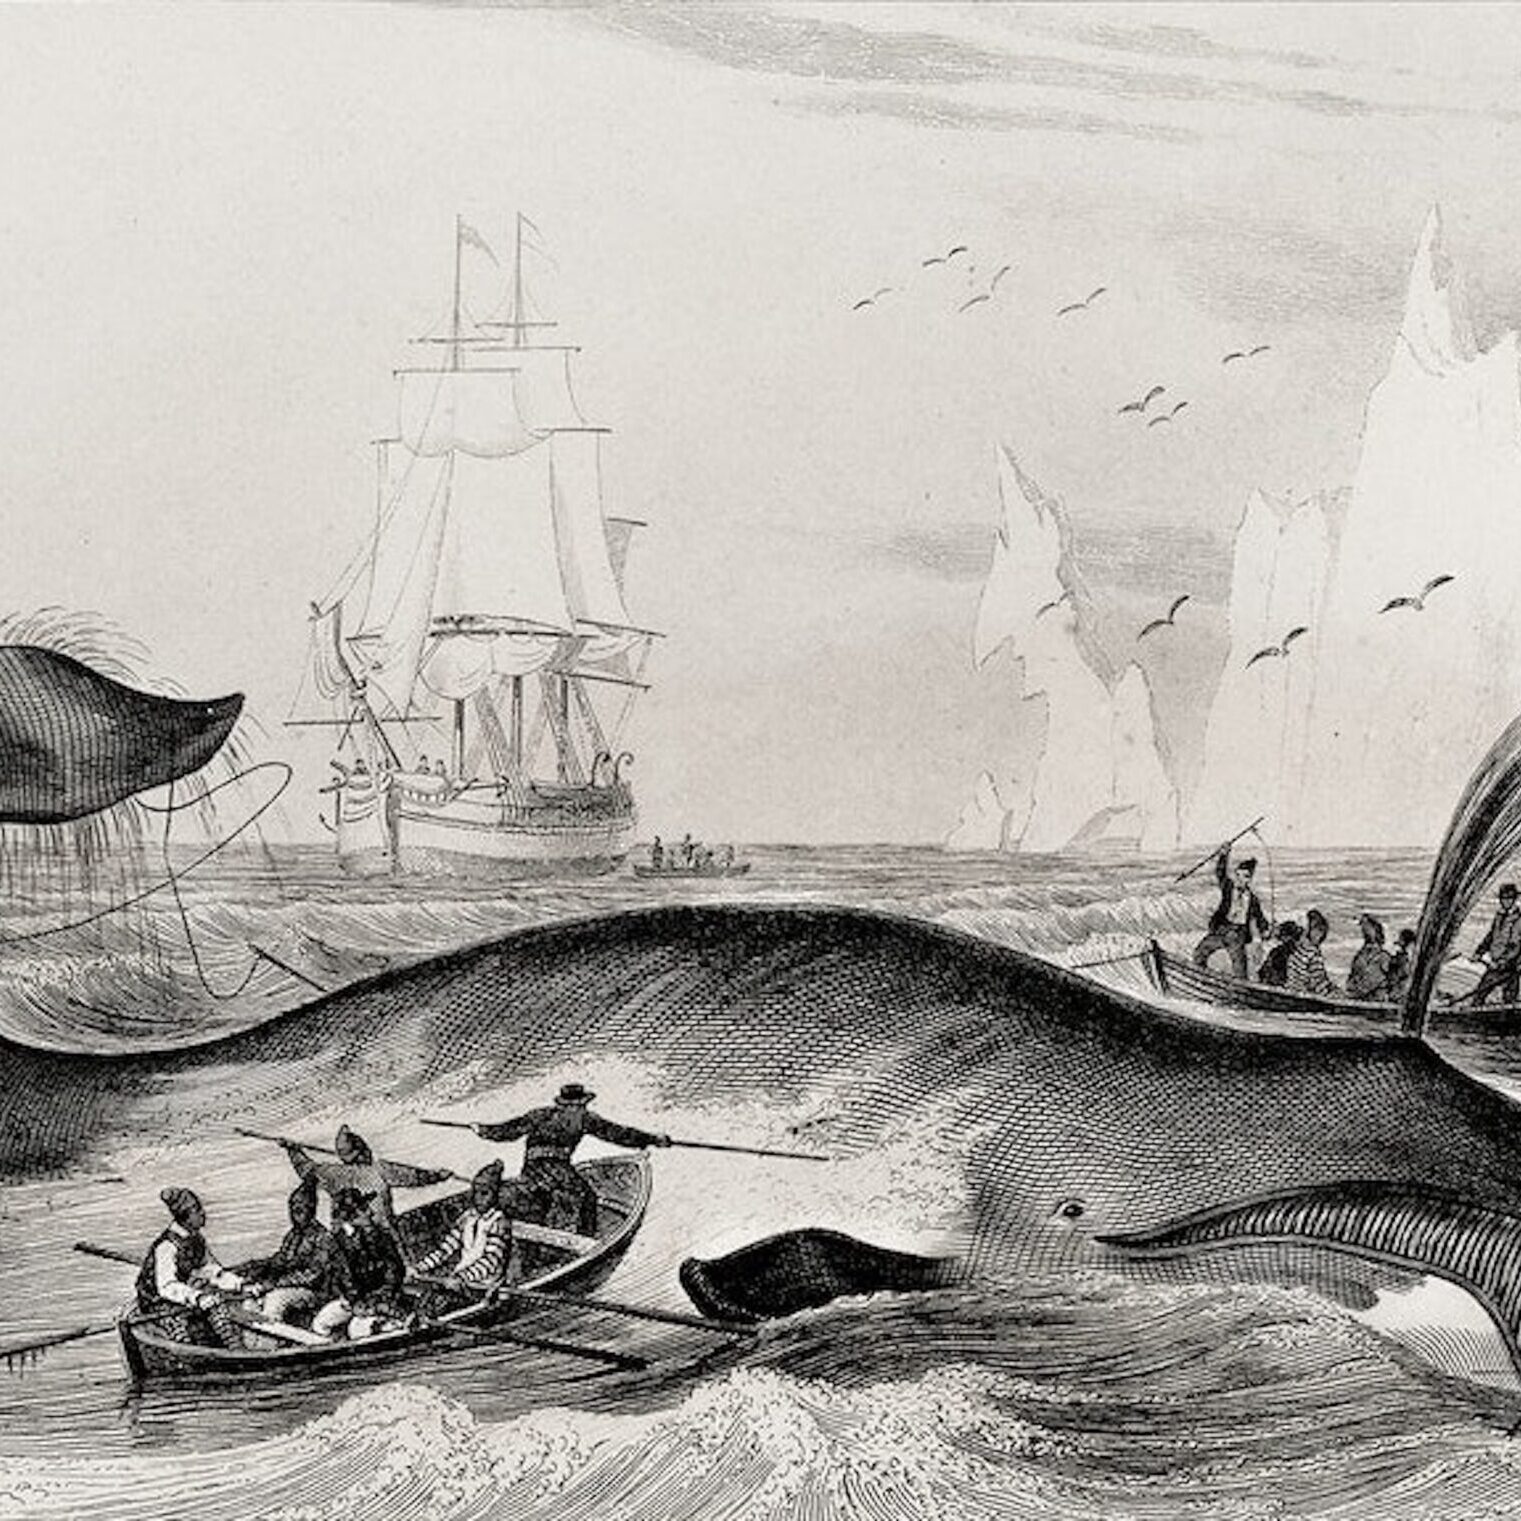 An old drawing of a whale being attacked by men on boats